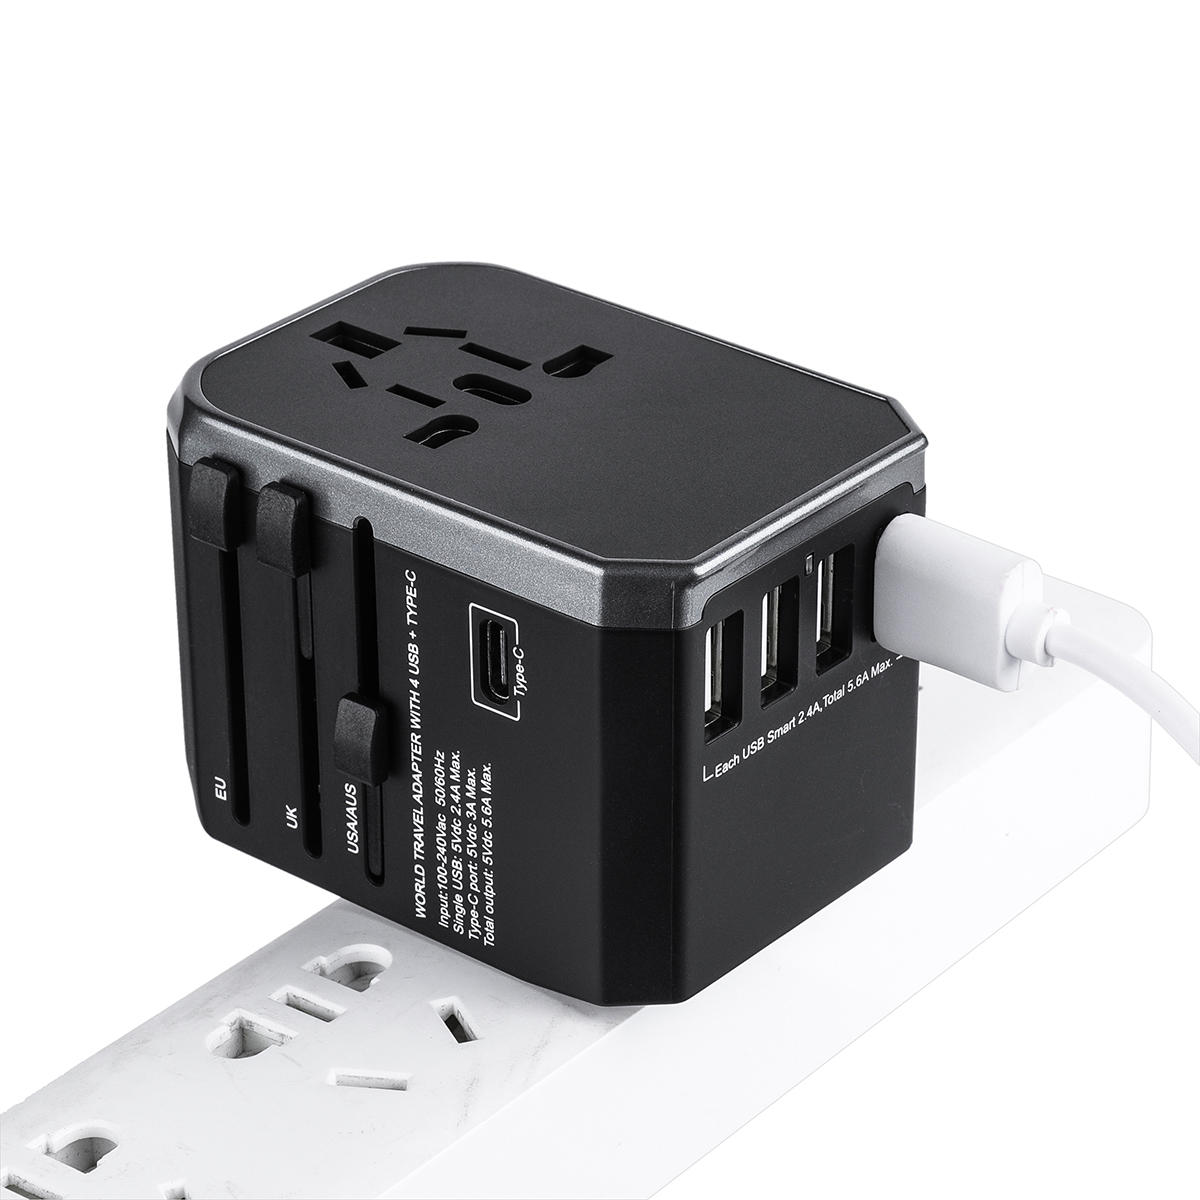 best price,eivotor,universal,2.4a,charger,coupon,price,discount